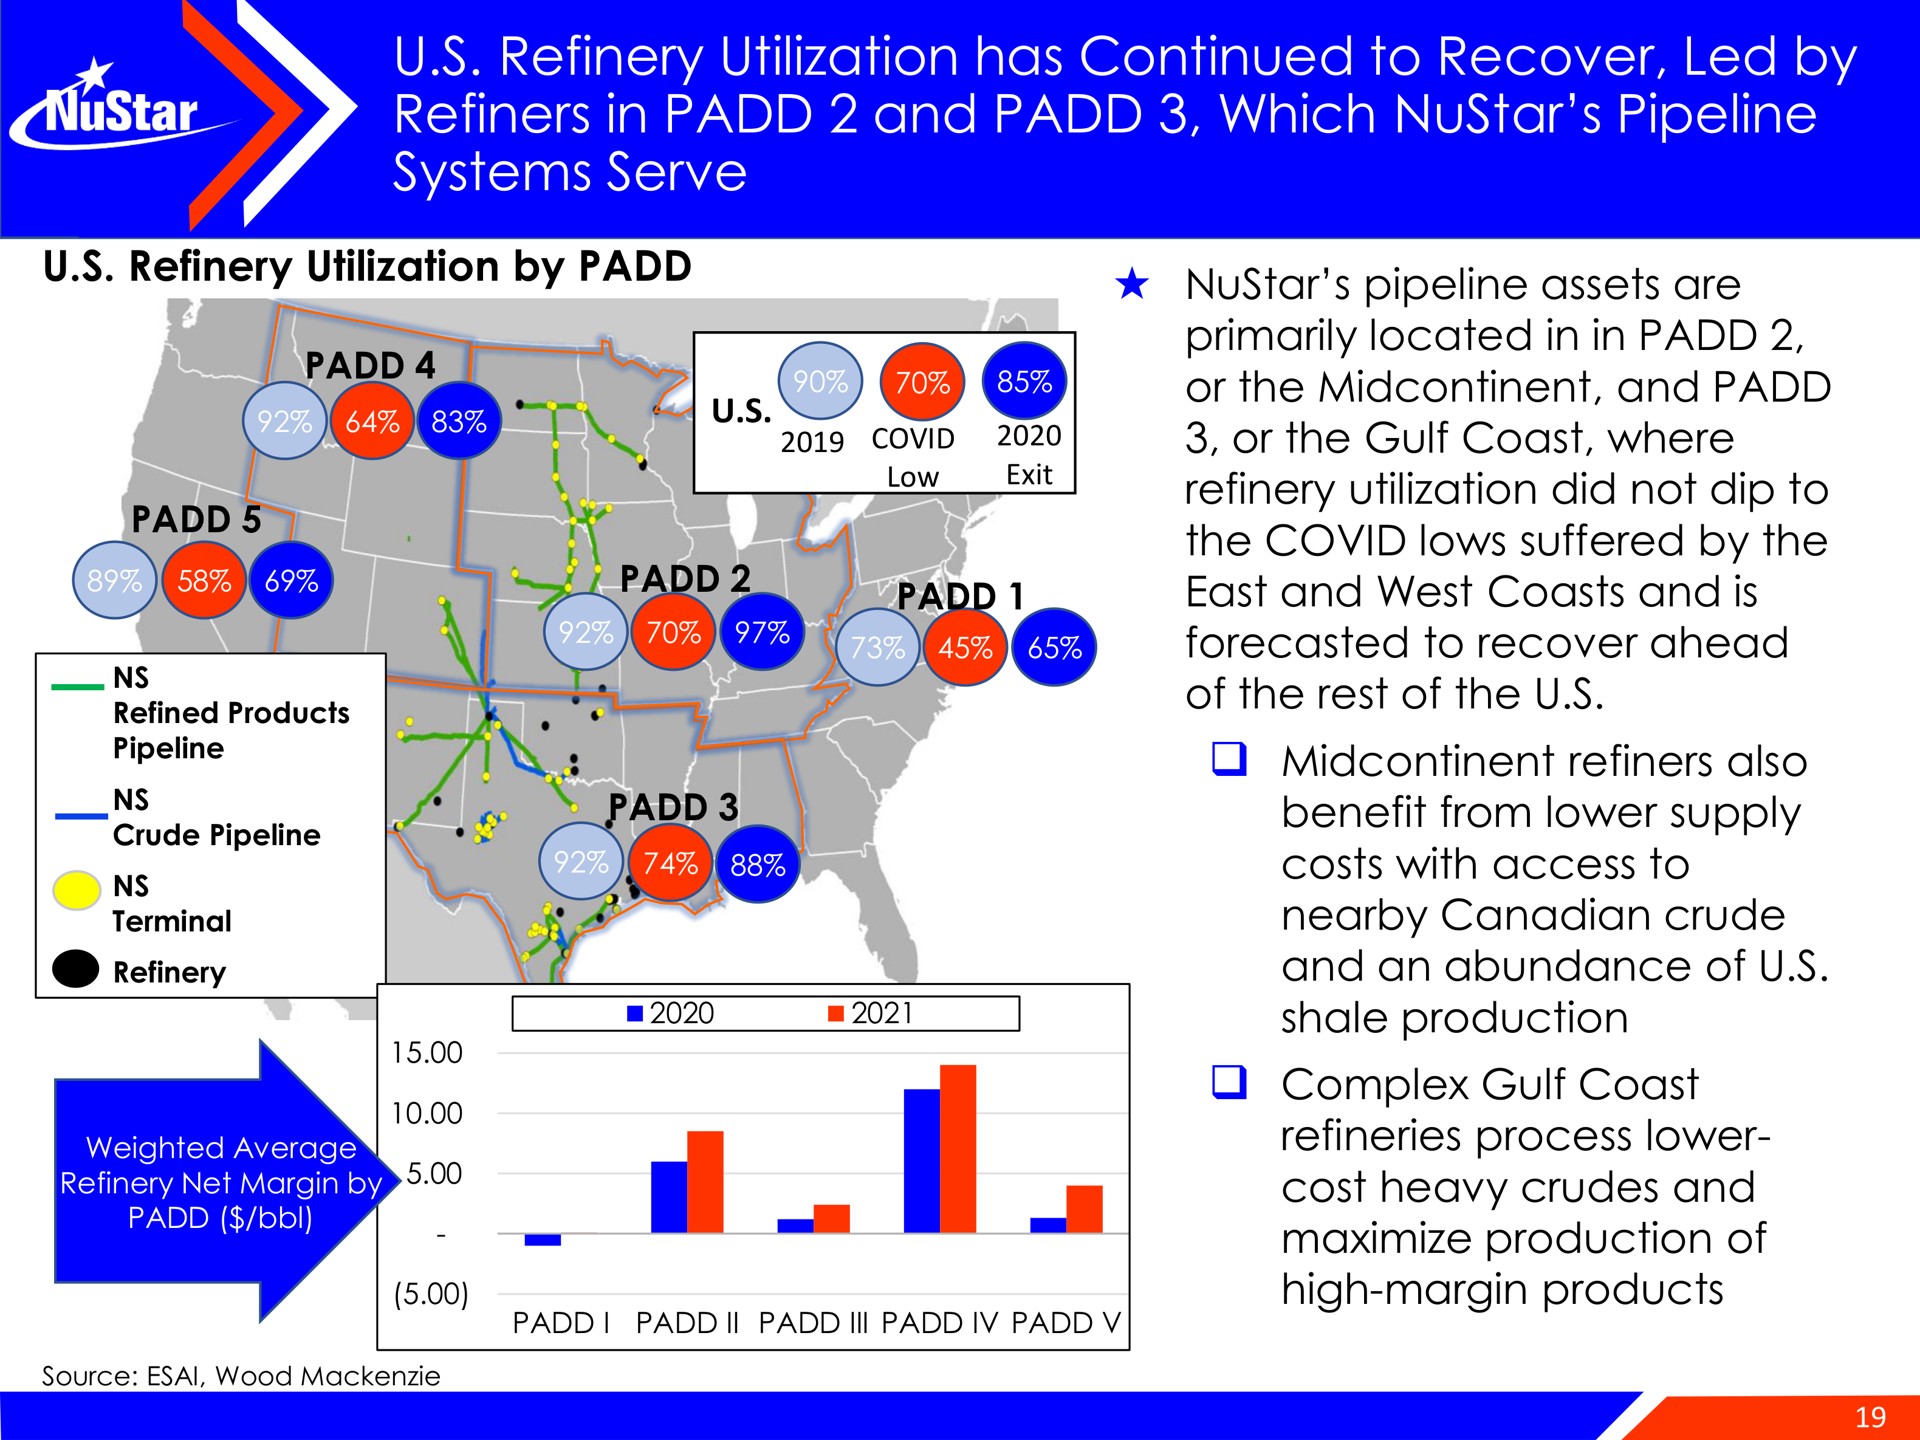 refinery utilization has continued to recover led by refiners in and which pipeline systems serve | NuStar Energy